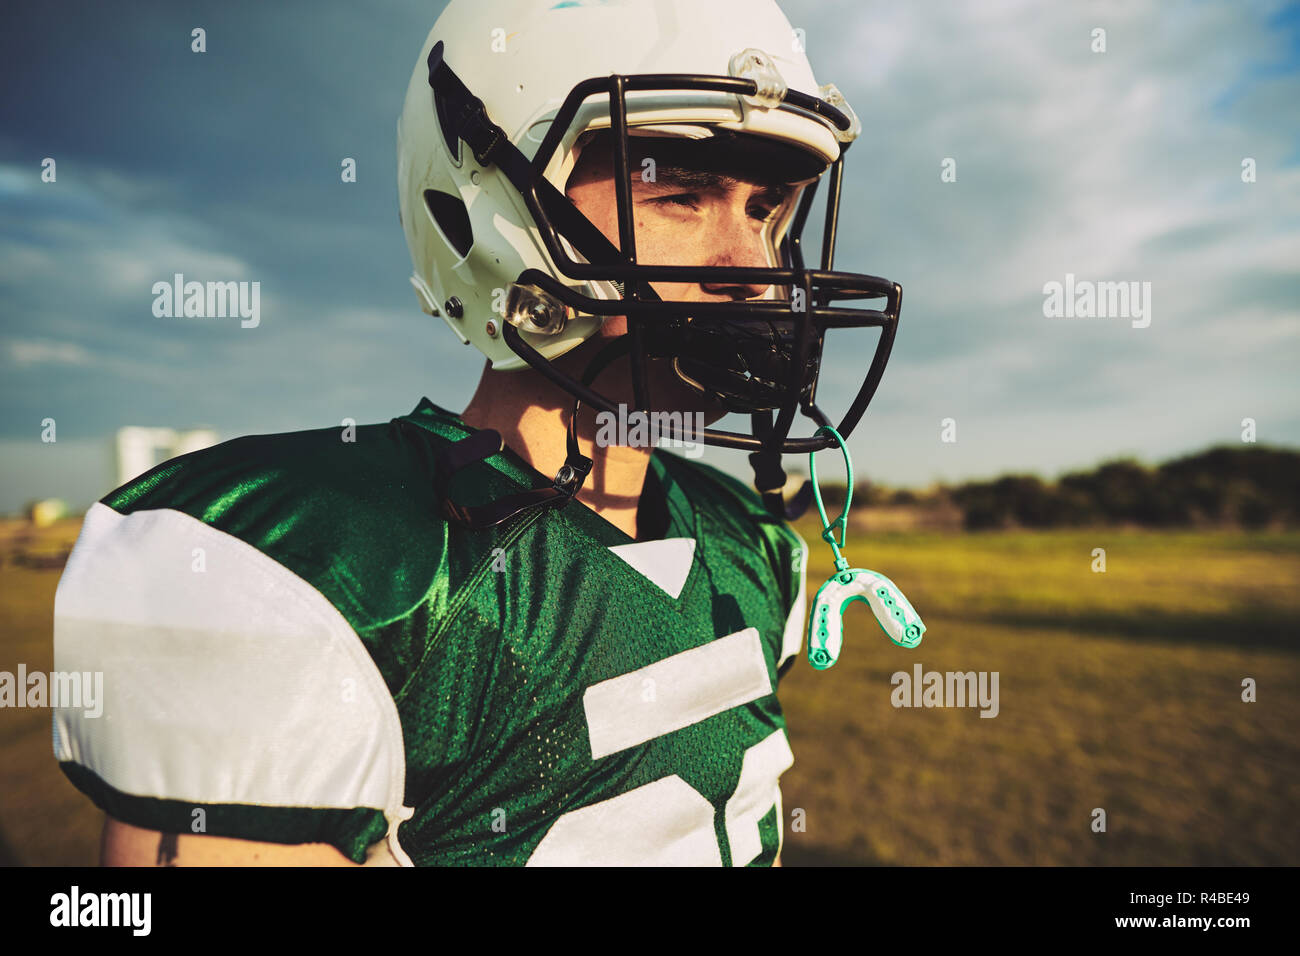 Young American football player taking a break with his mouth guard hanging from his helmet during a team practice session Stock Photo